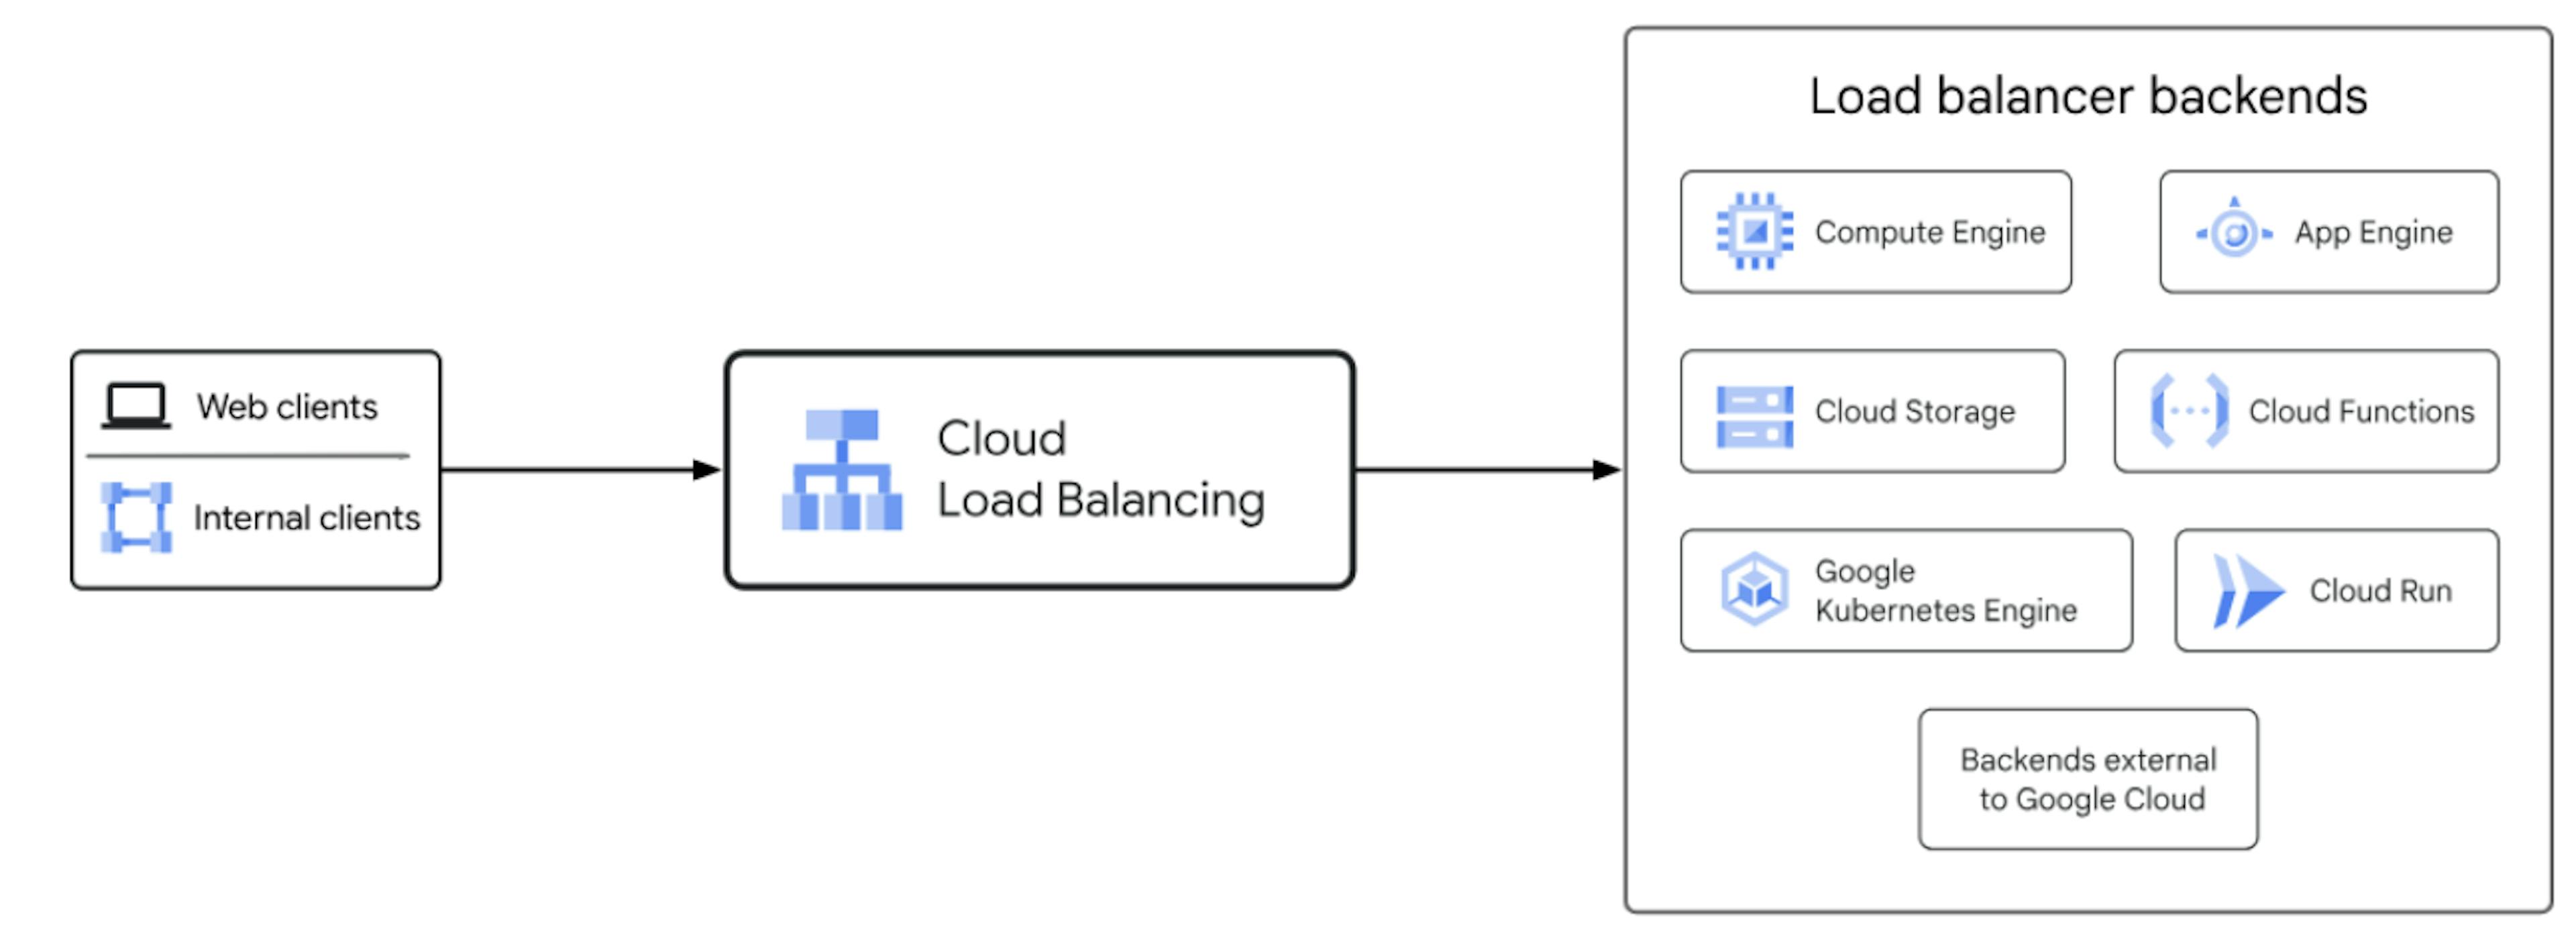 Review of cloud load balancing by Google Cloud